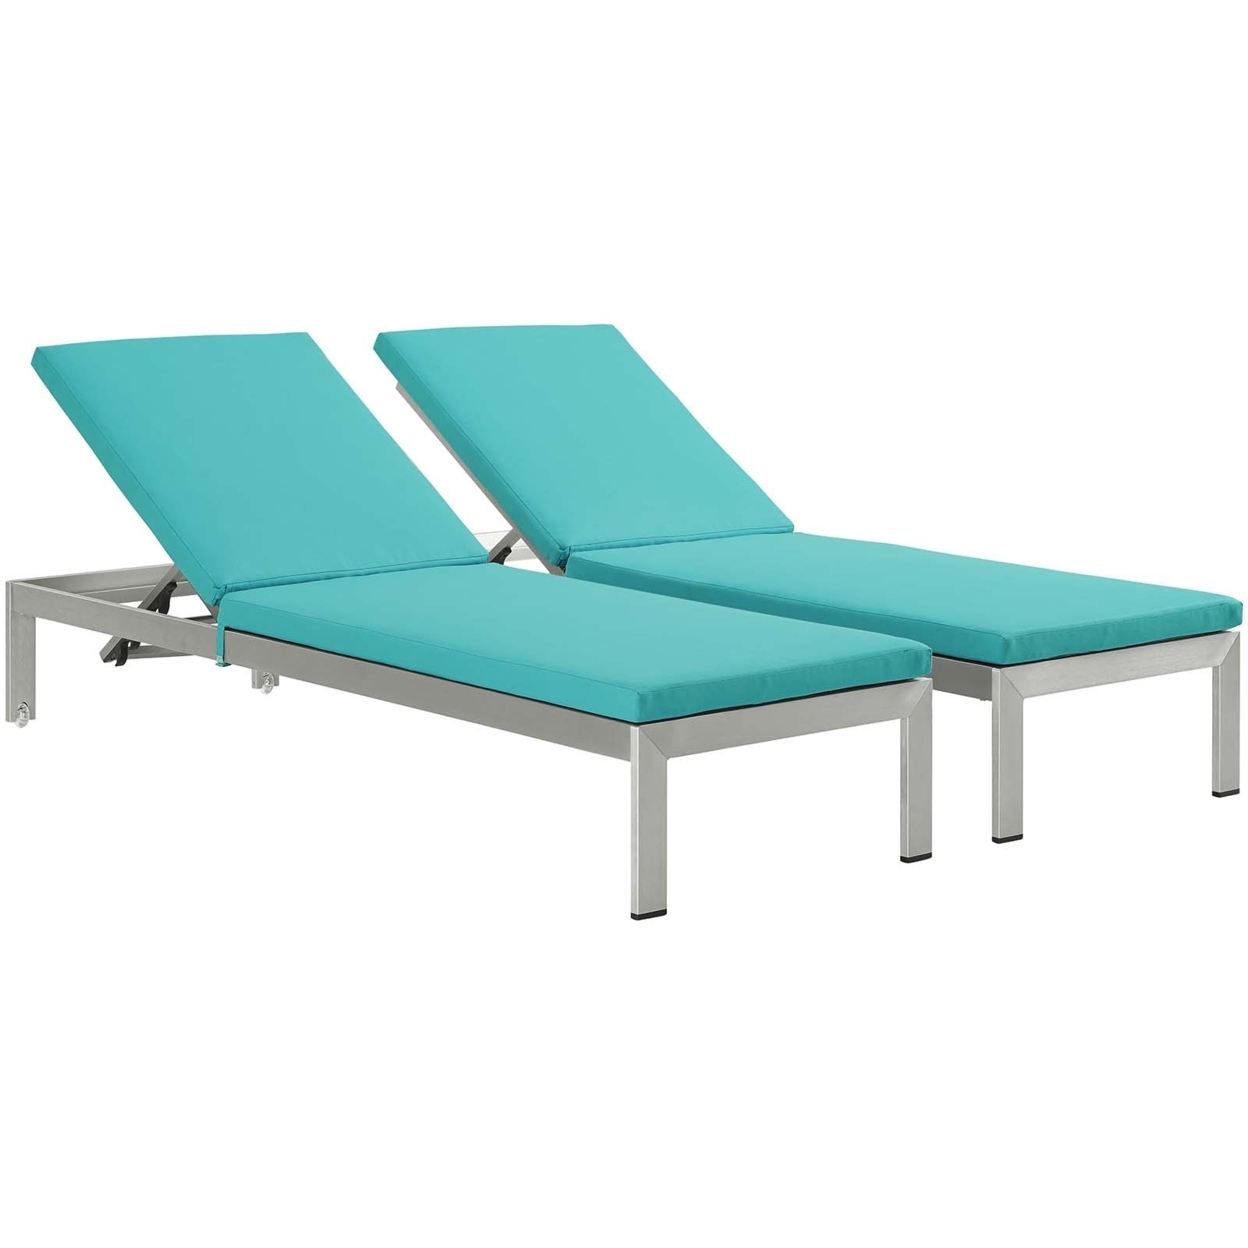 Shore Chaise With Cushions Outdoor Patio Aluminum Set Of 2, Silver Turquoise